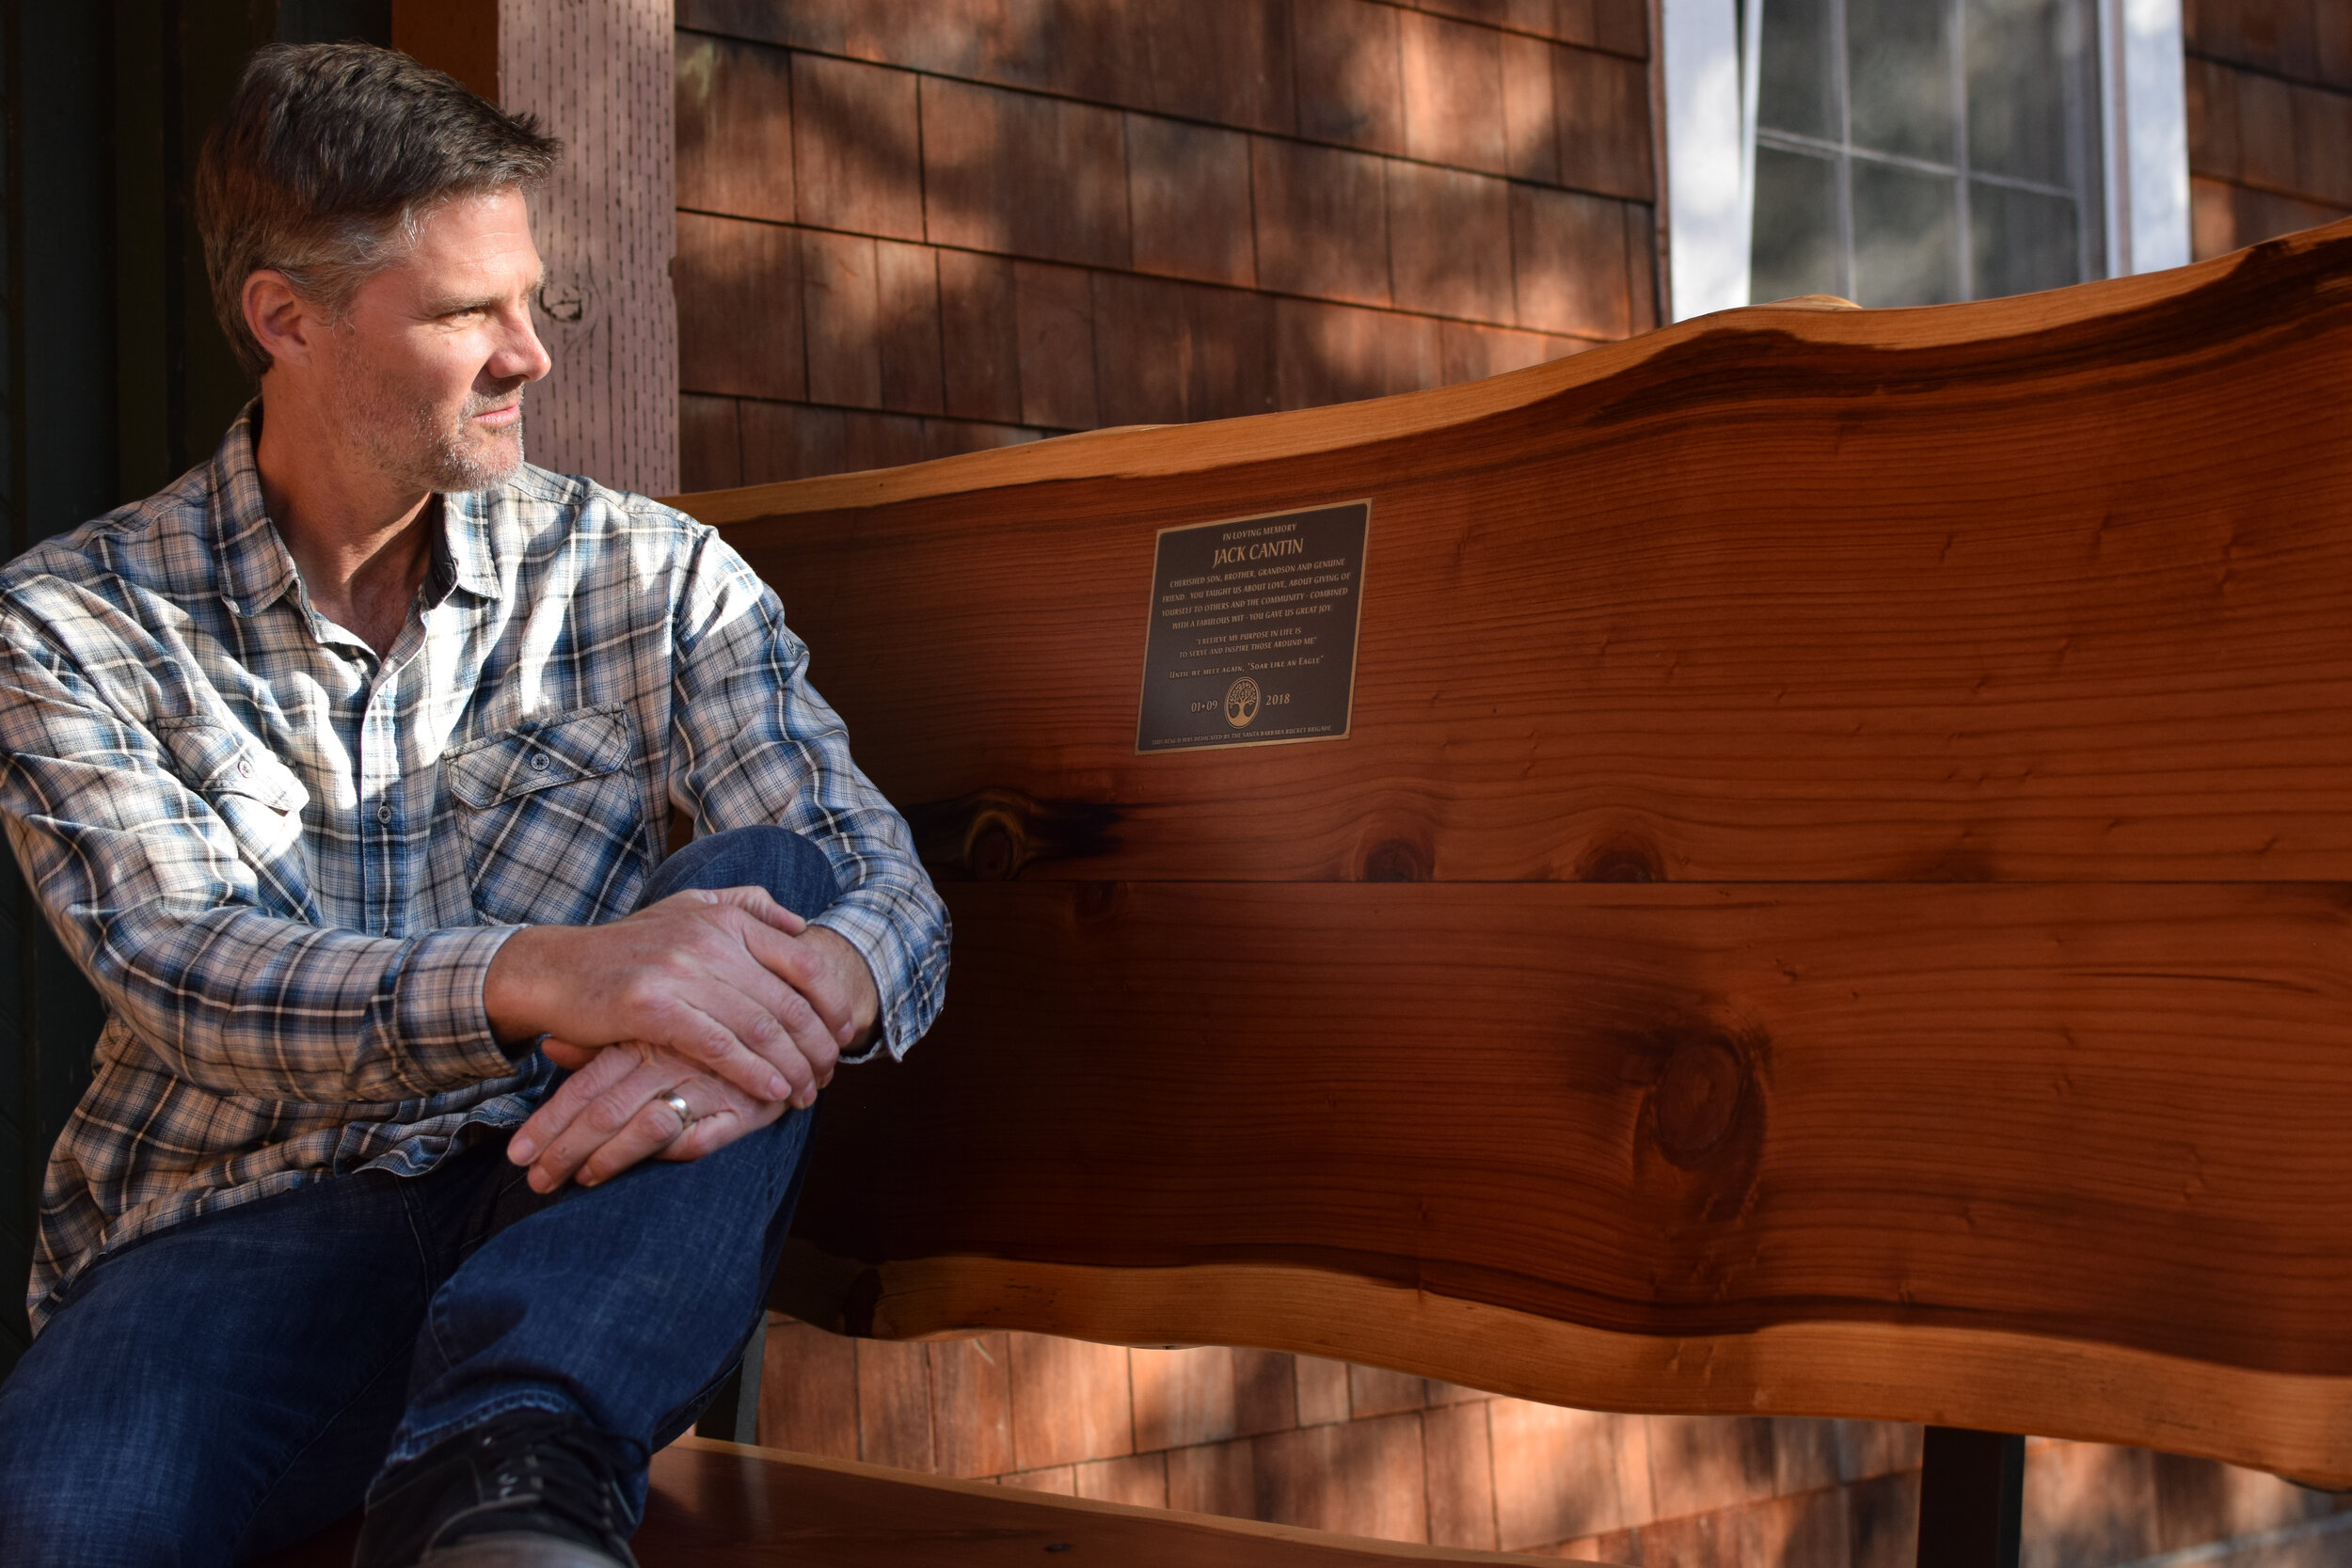  Abe Powell, Executive Director of the Santa Barbara Bucket Brigade, is the driving force behind the Dave and Jack Cantin bench dedication project. The benches are dedicated to a father and son who lost their lives in the Montecito mud slides. Both b